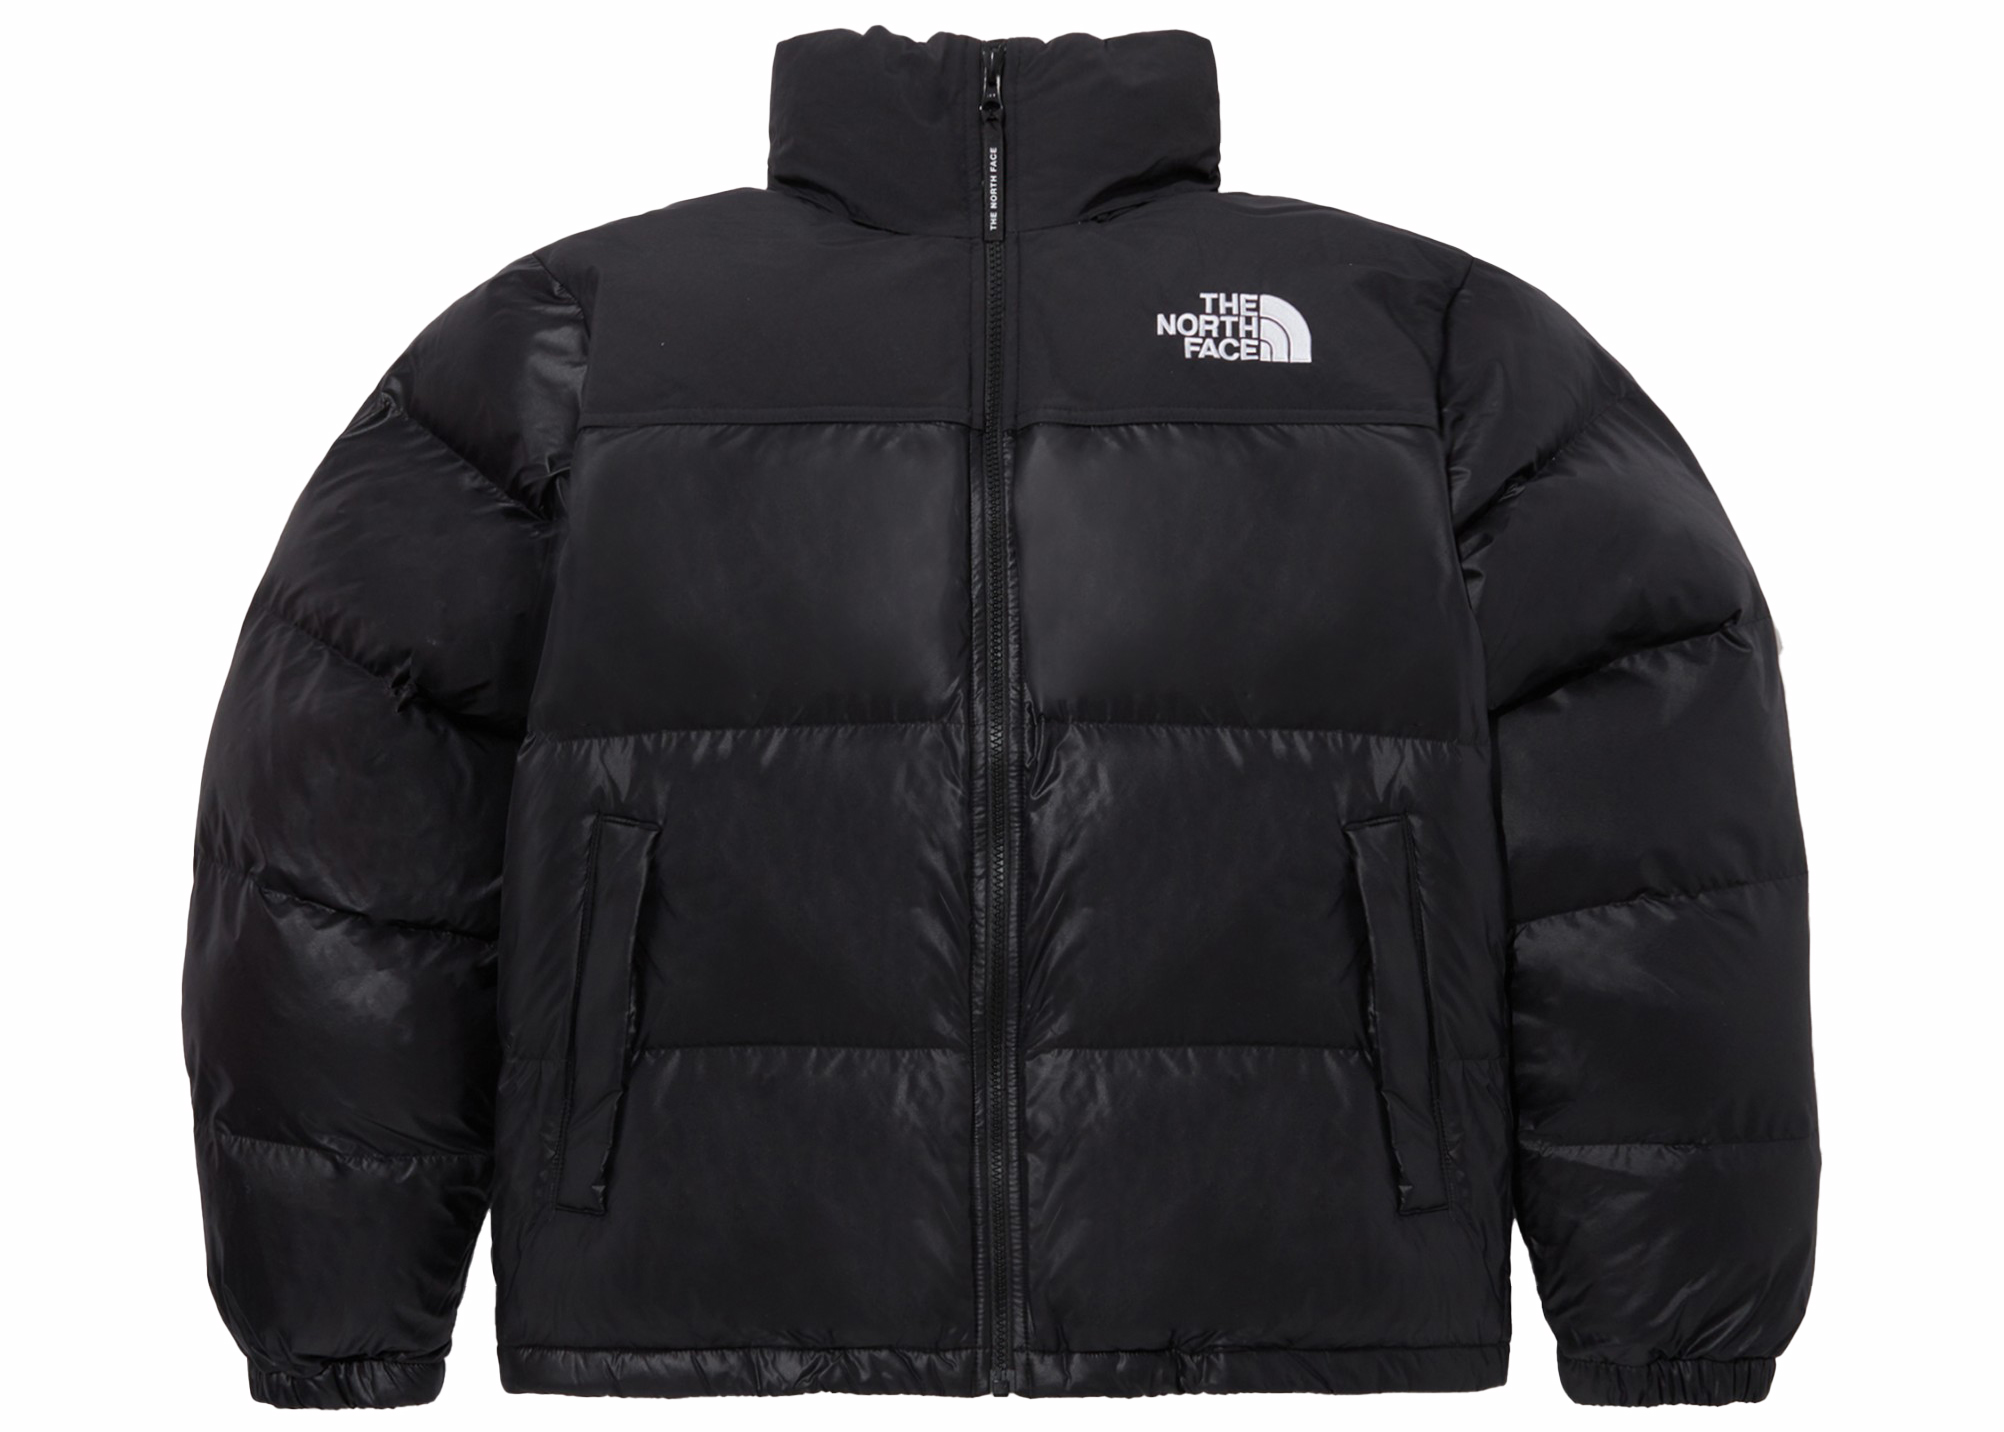 Buy The North Face Men's M FORN SOFTSHELL Jacket, Tnf Black-Tnf Black, M at  Amazon.in